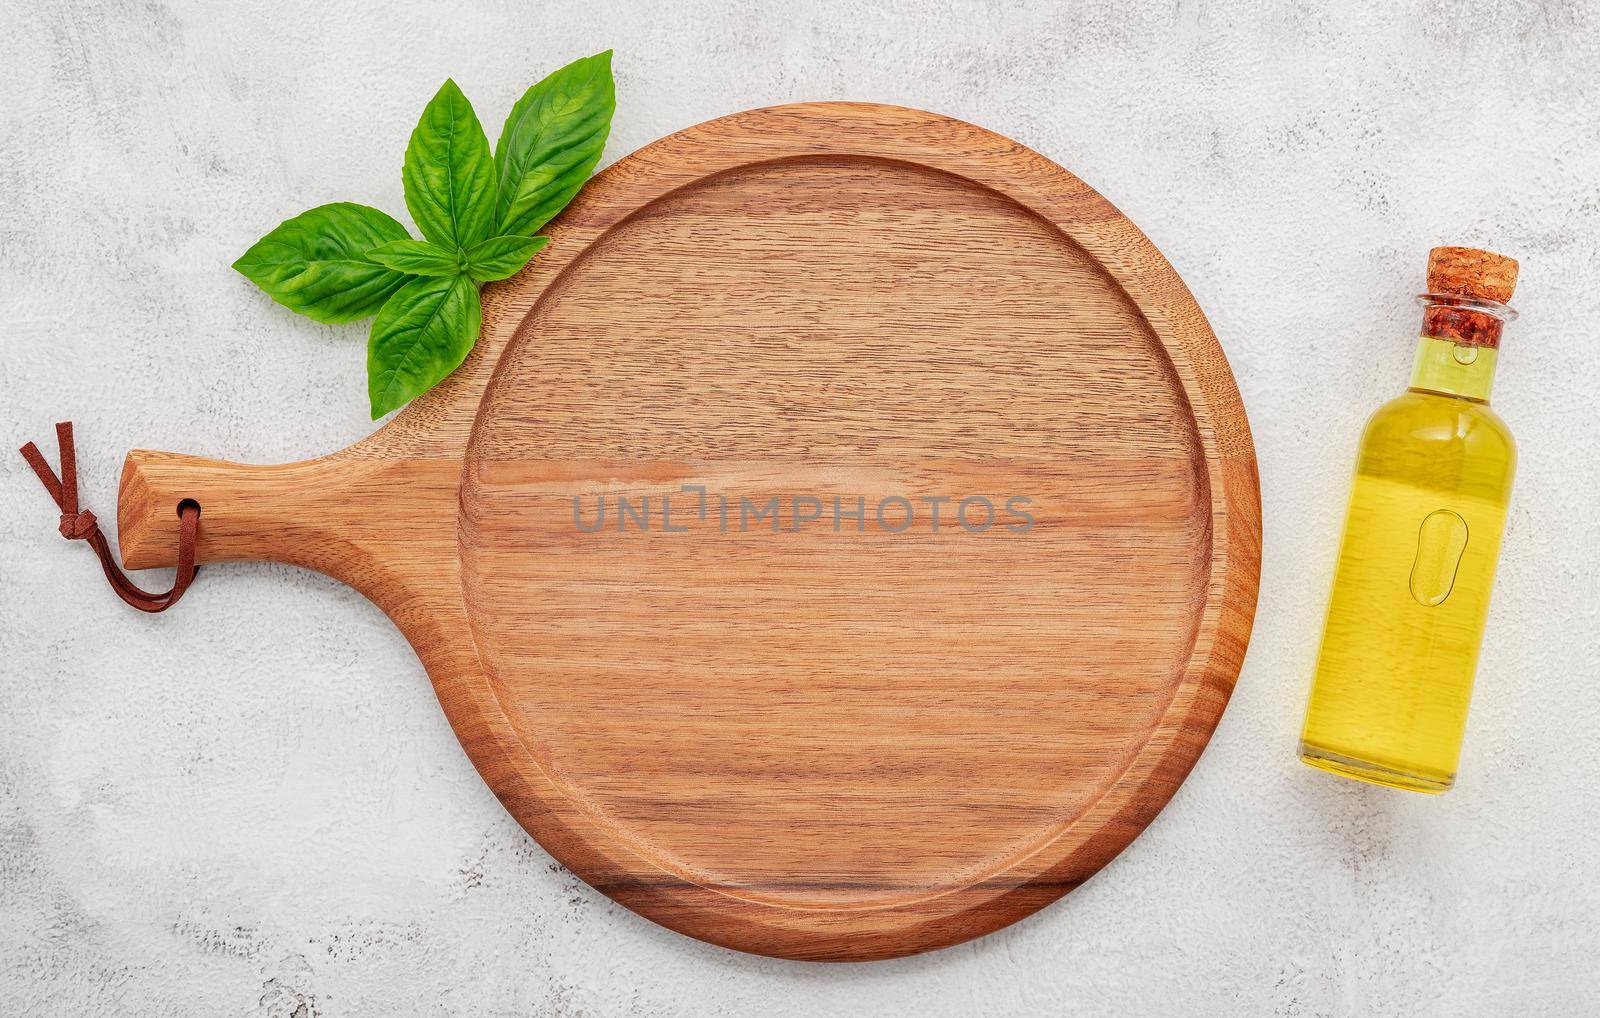 Empty wooden pizza platter set up on white concrete. Pizza tray on white concrete background flat lay and copy space.
 by kerdkanno